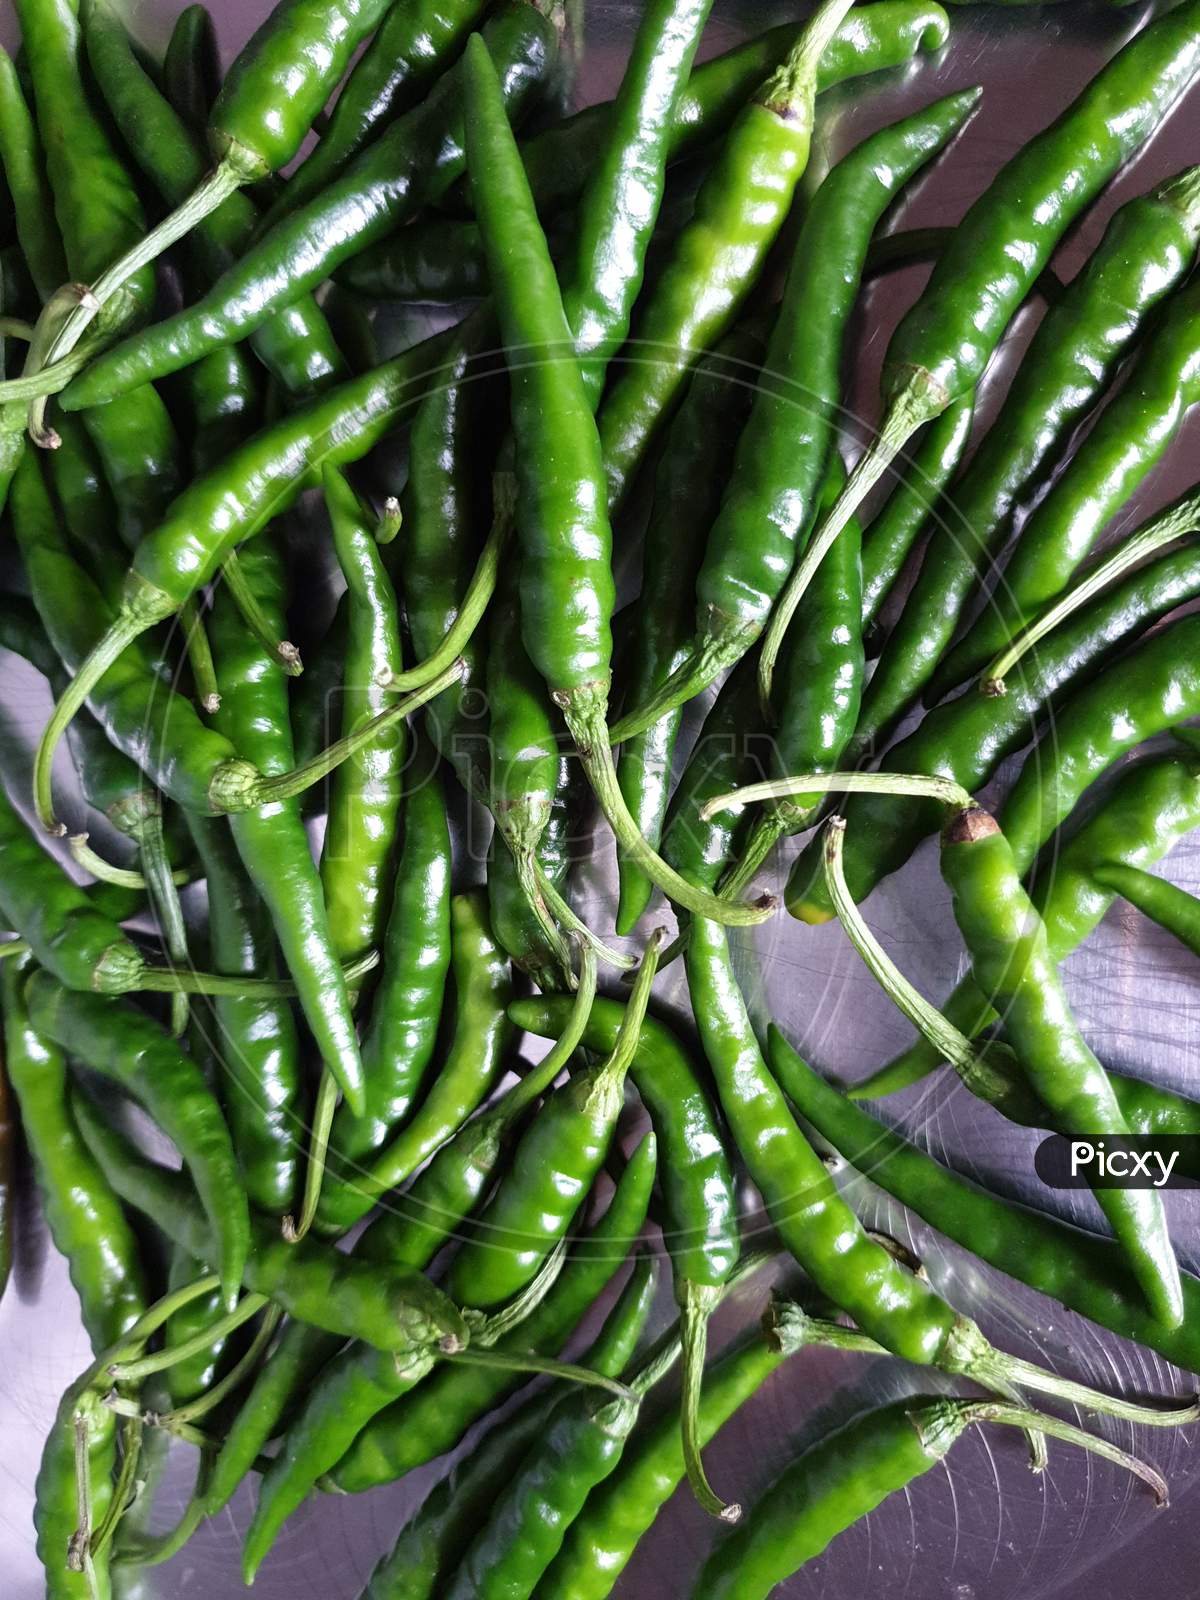 These are the green chilli